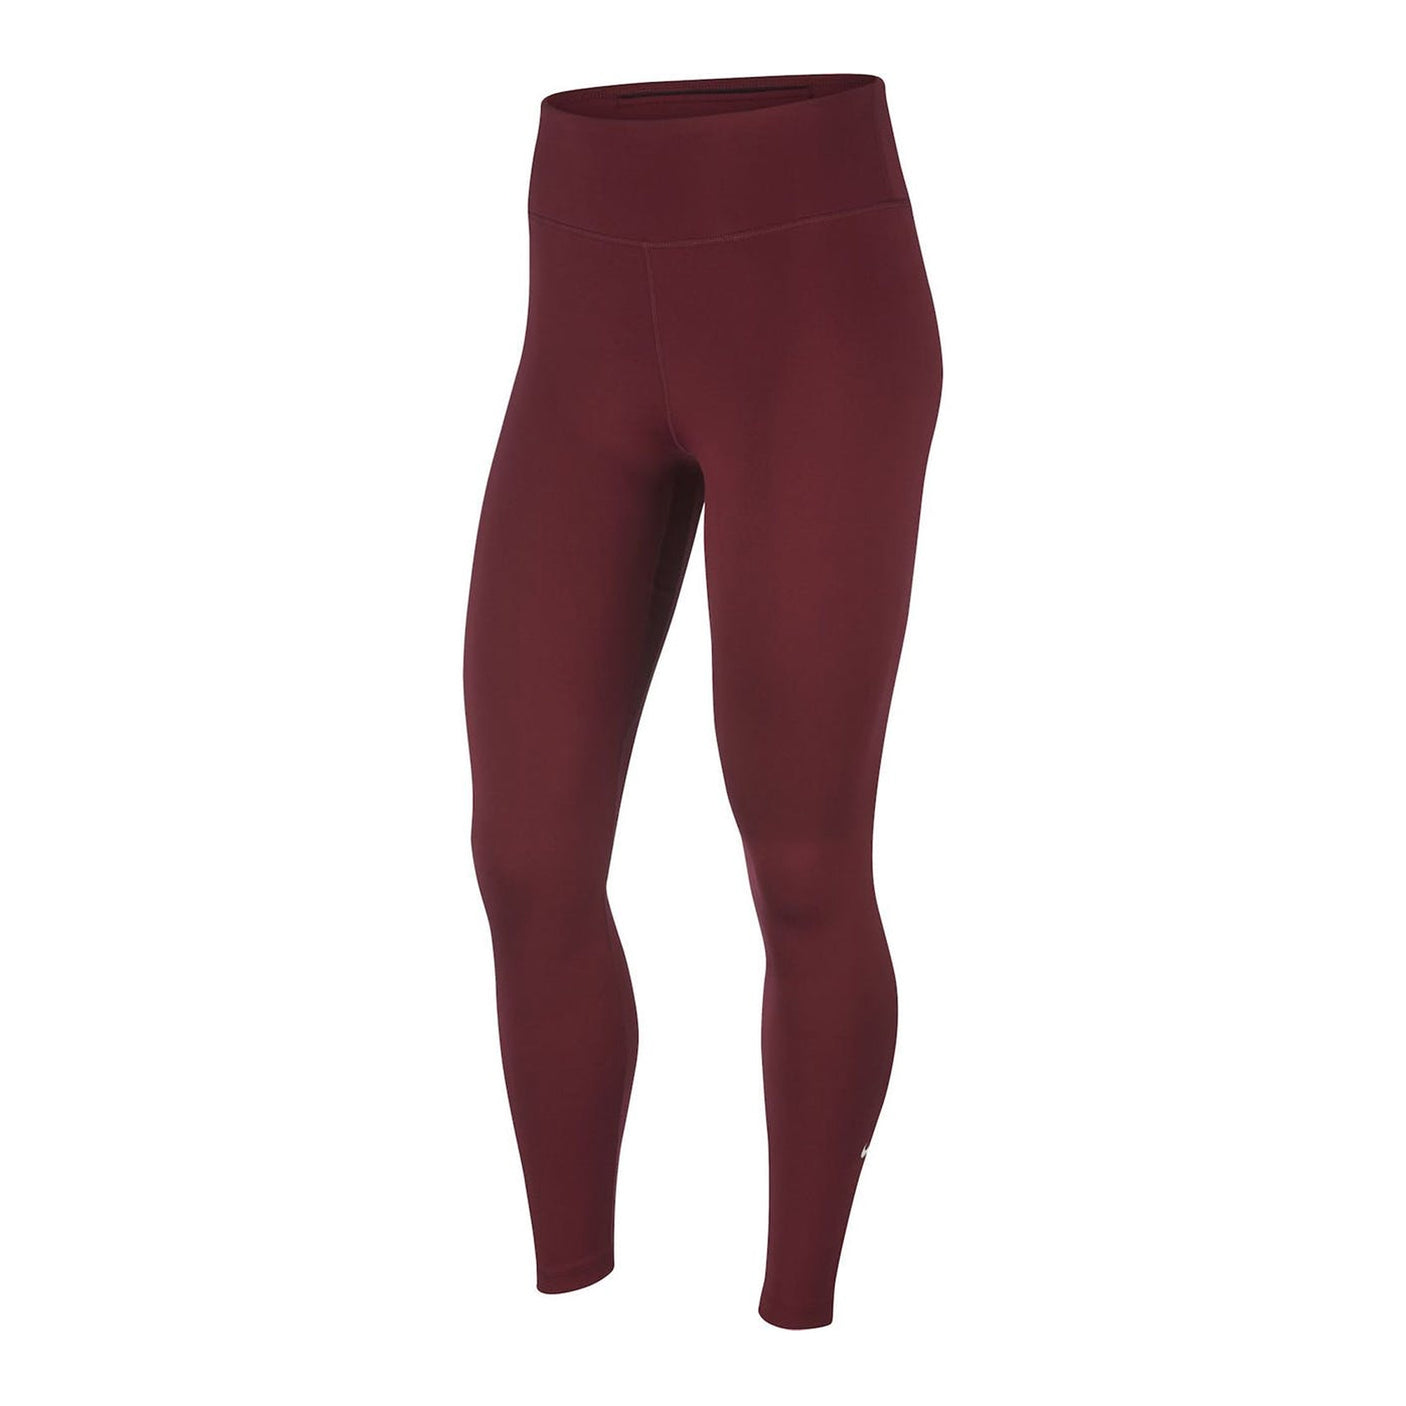 https://aztecasoccer.com/cdn/shop/products/Nike-Womens-DriFit-One-MidRise-Tights-Dark-Beetroot-White-Front.jpg?v=1647979028&width=1406